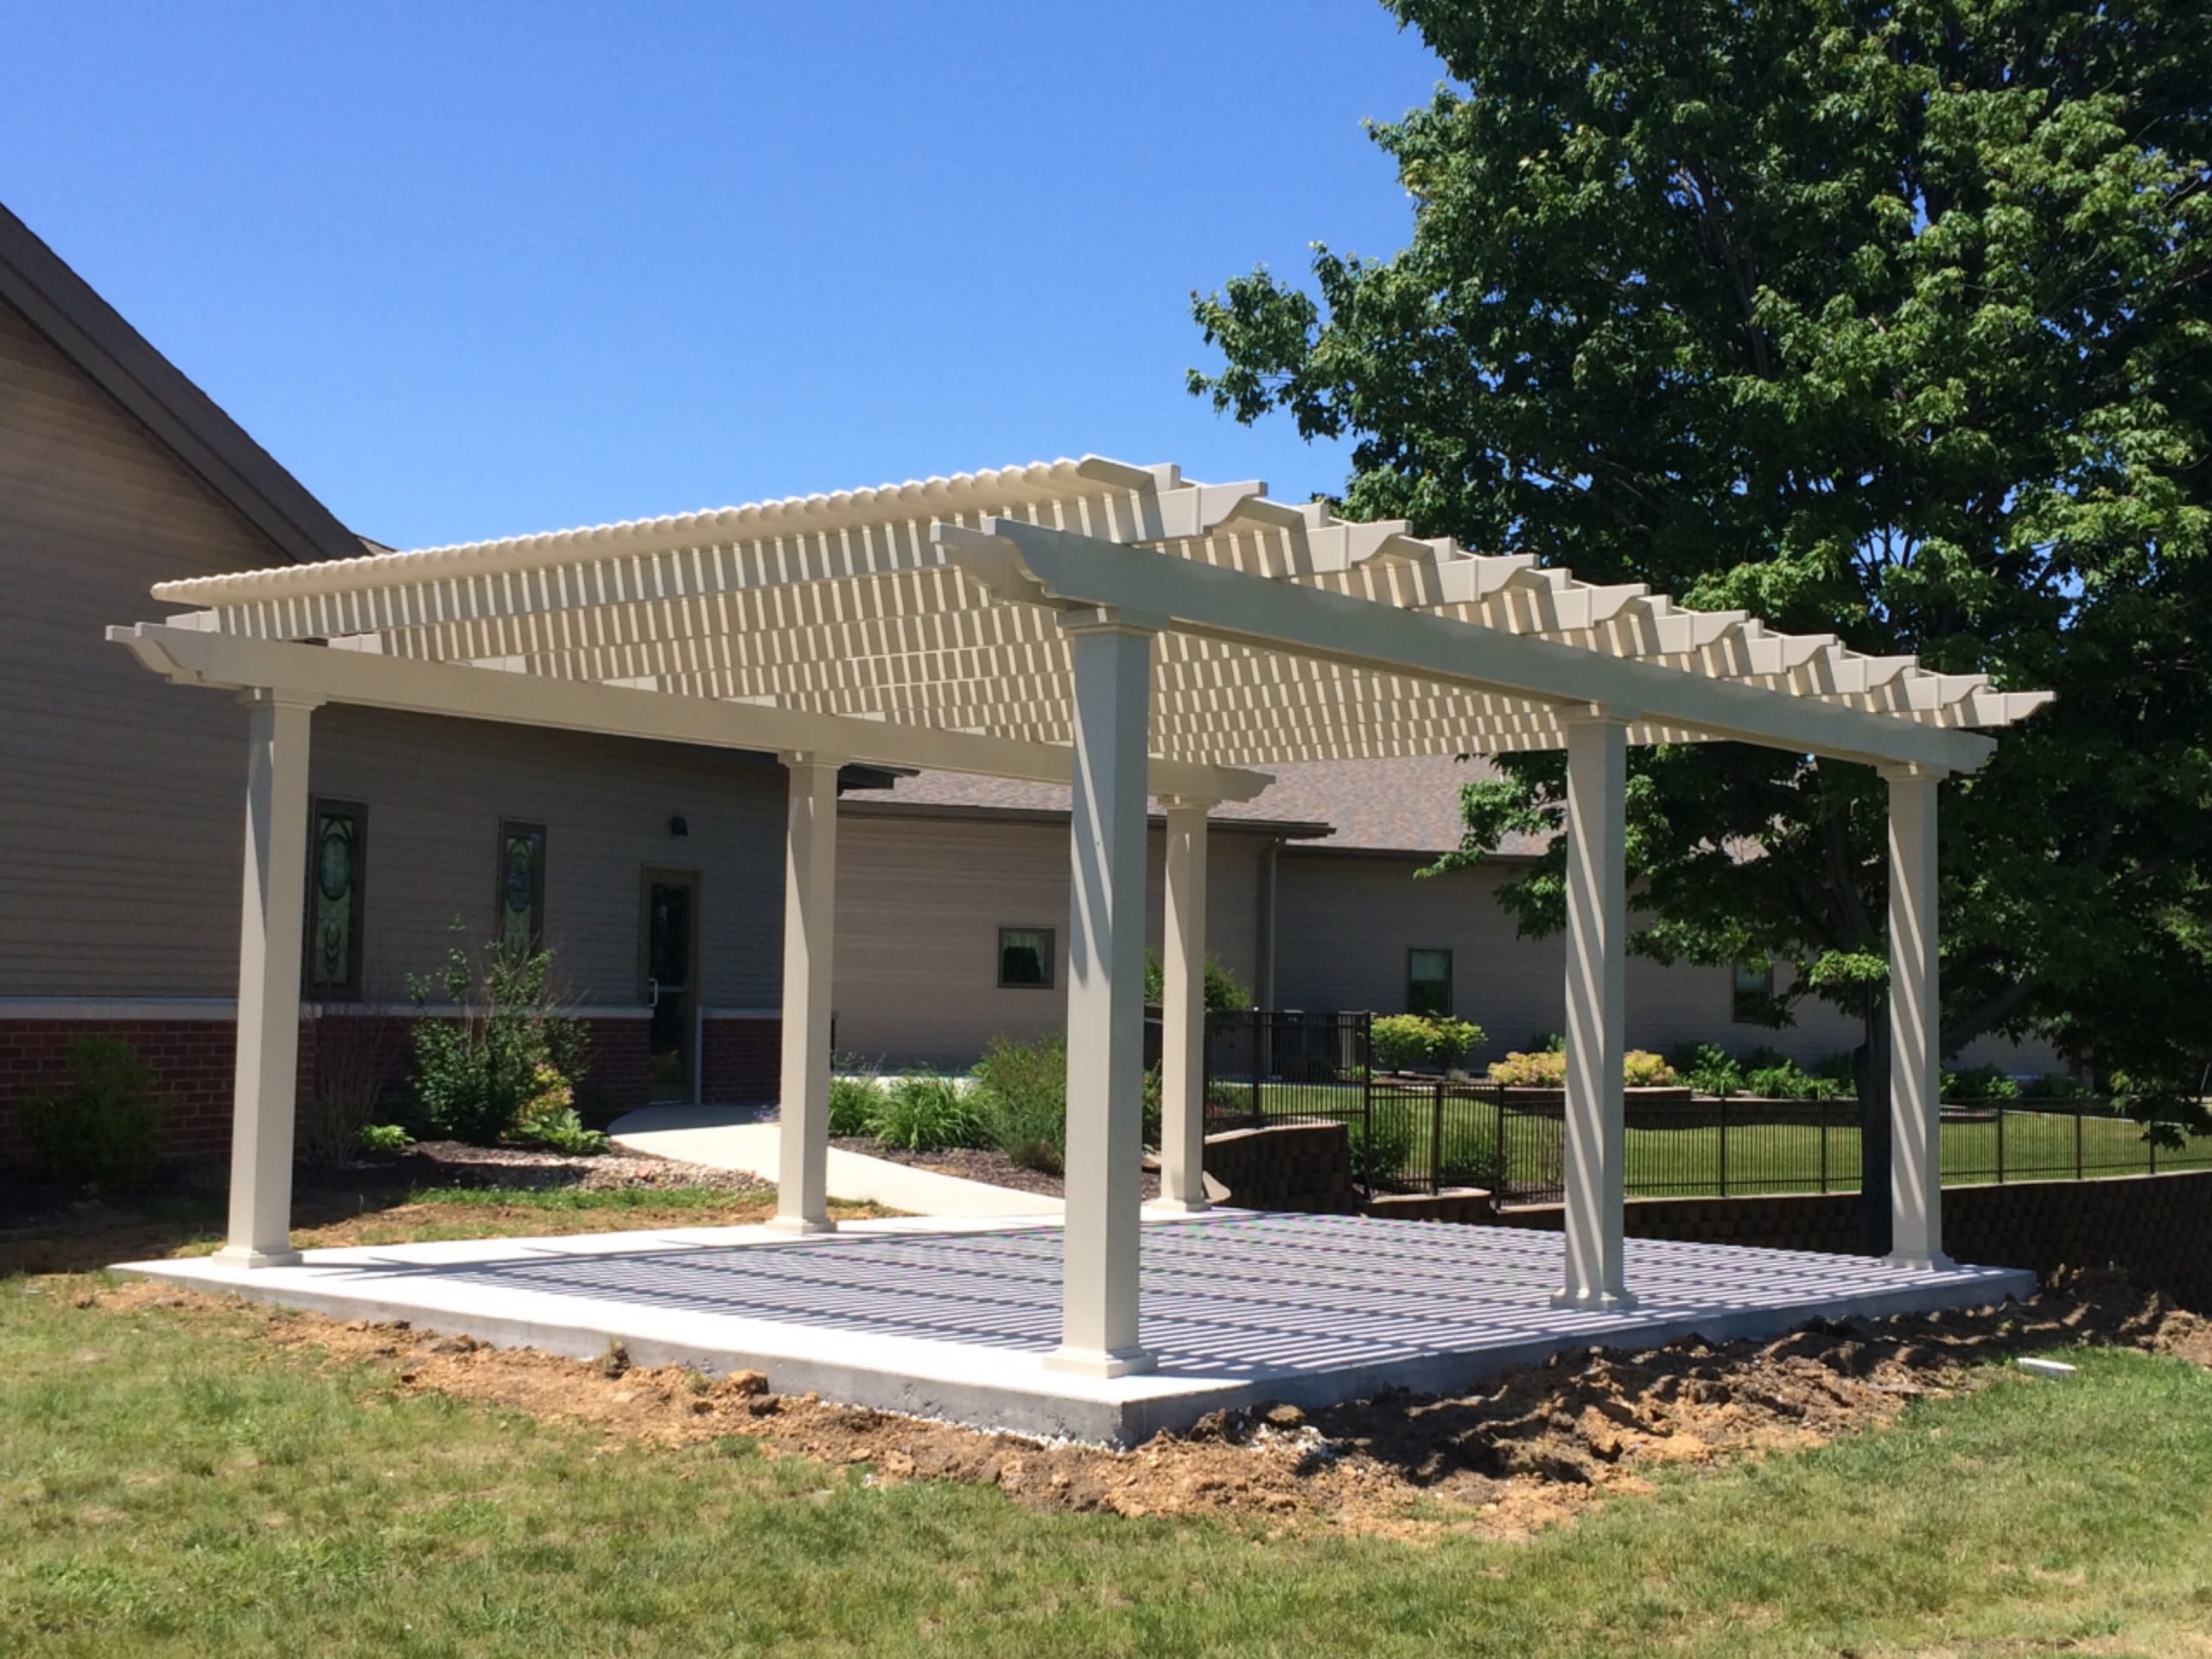 This white pergola is providing shade over an open, empty area. There is a house behind the pergola, and a sidewalk connecting the house to the pergola area.